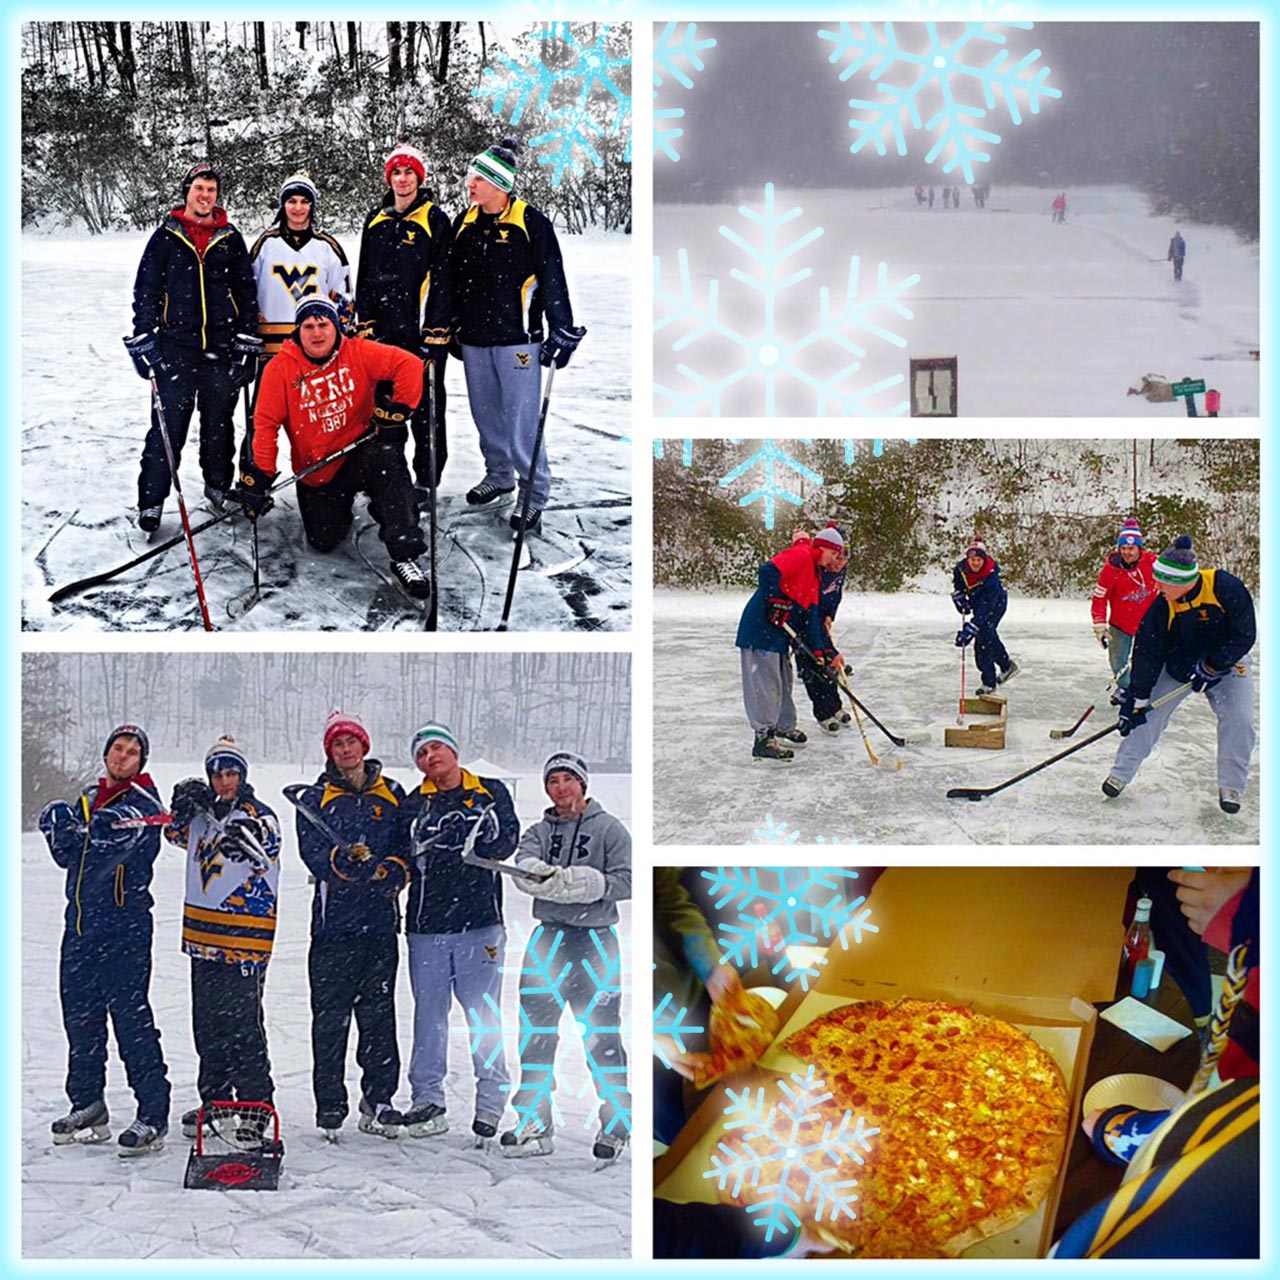 West Virginia Mountaineers hockey team practices in the snow